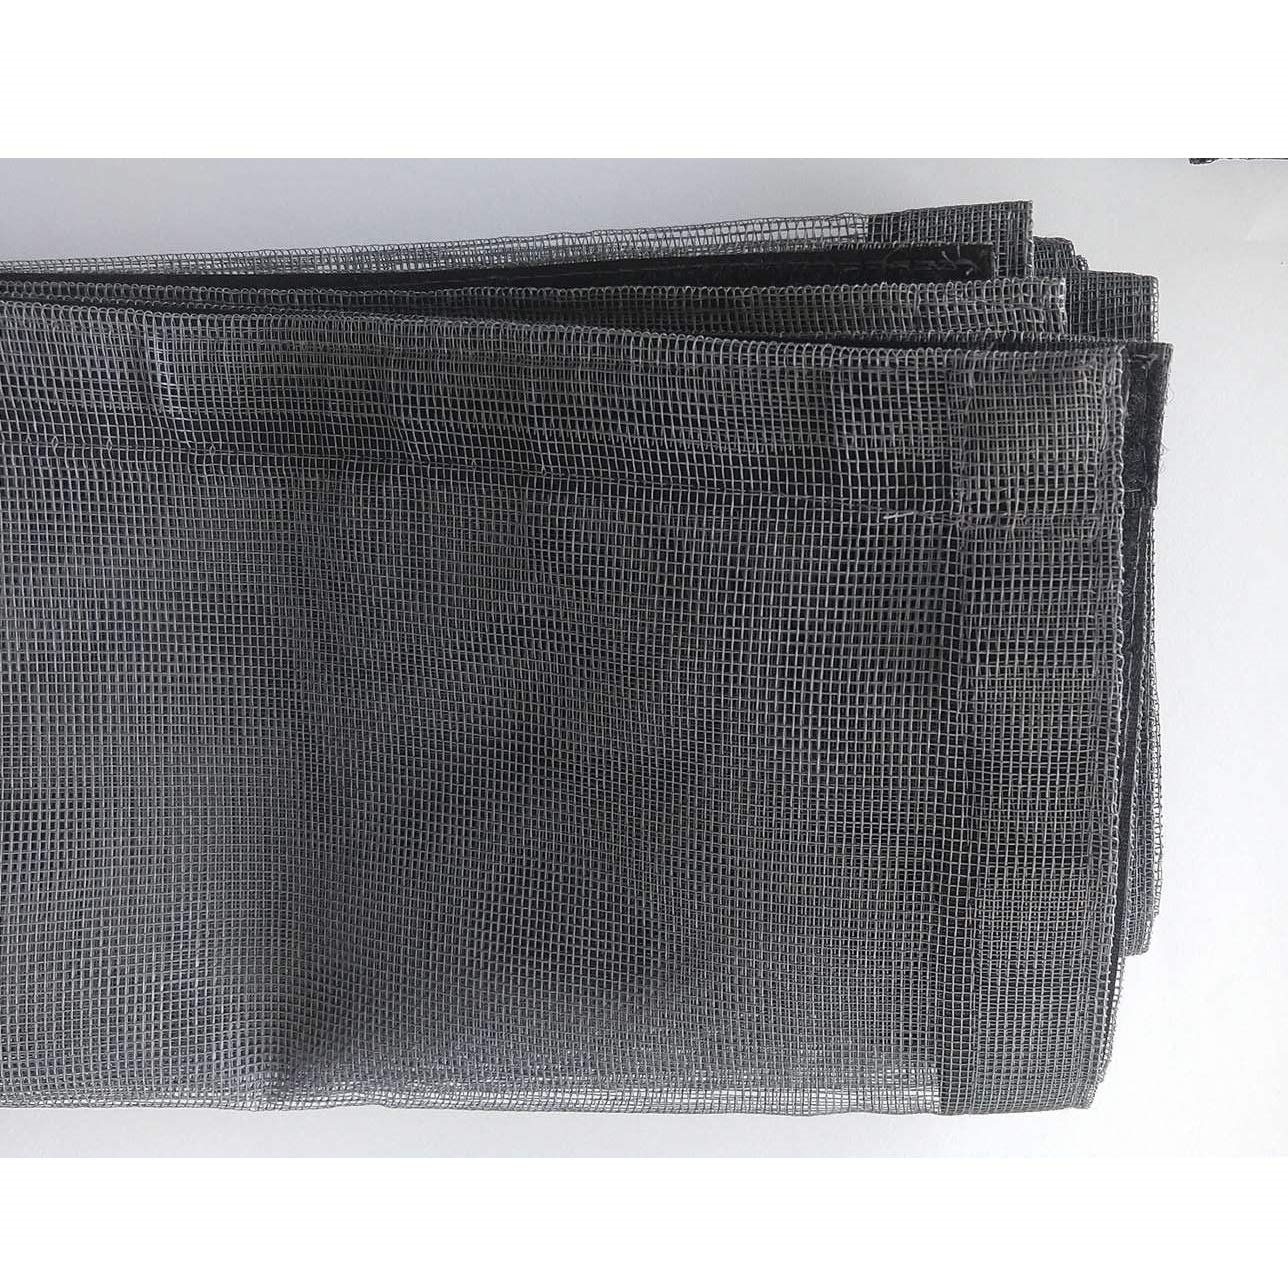 Grey Pre-Stitched Mosquito Mesh with Self-Adhesive Hook Tape for Windows